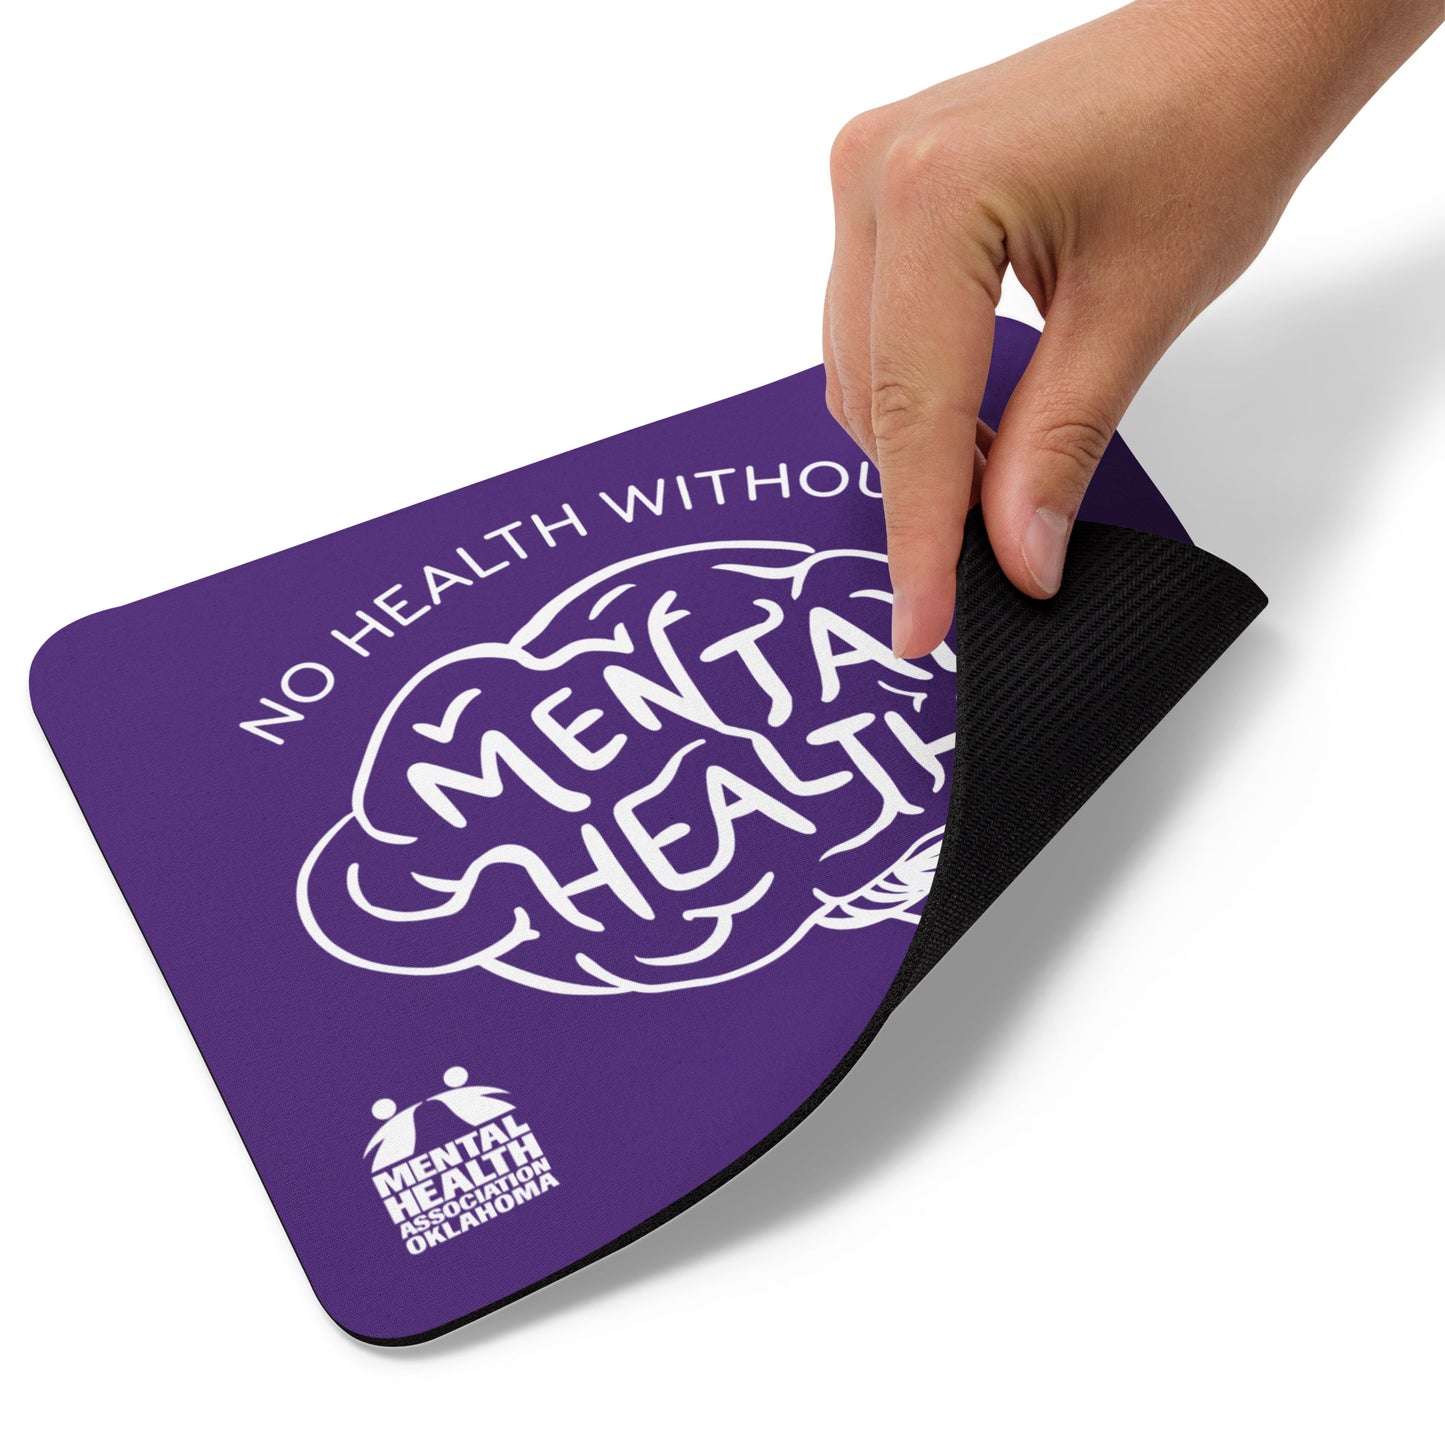 No Health Without Mental Health mouse pad